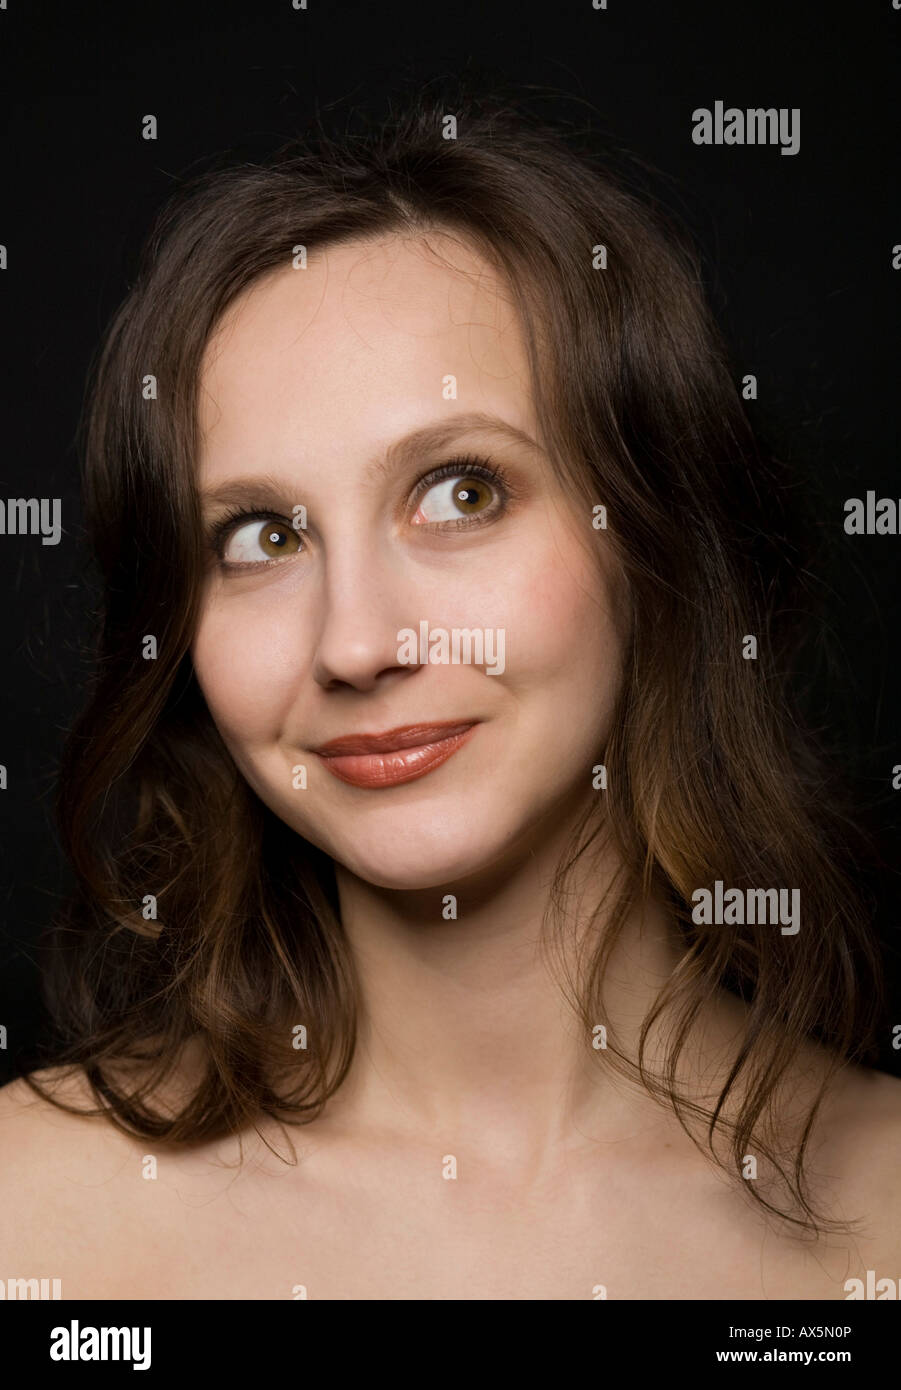 Portrait of a smiling young woman Stock Photo